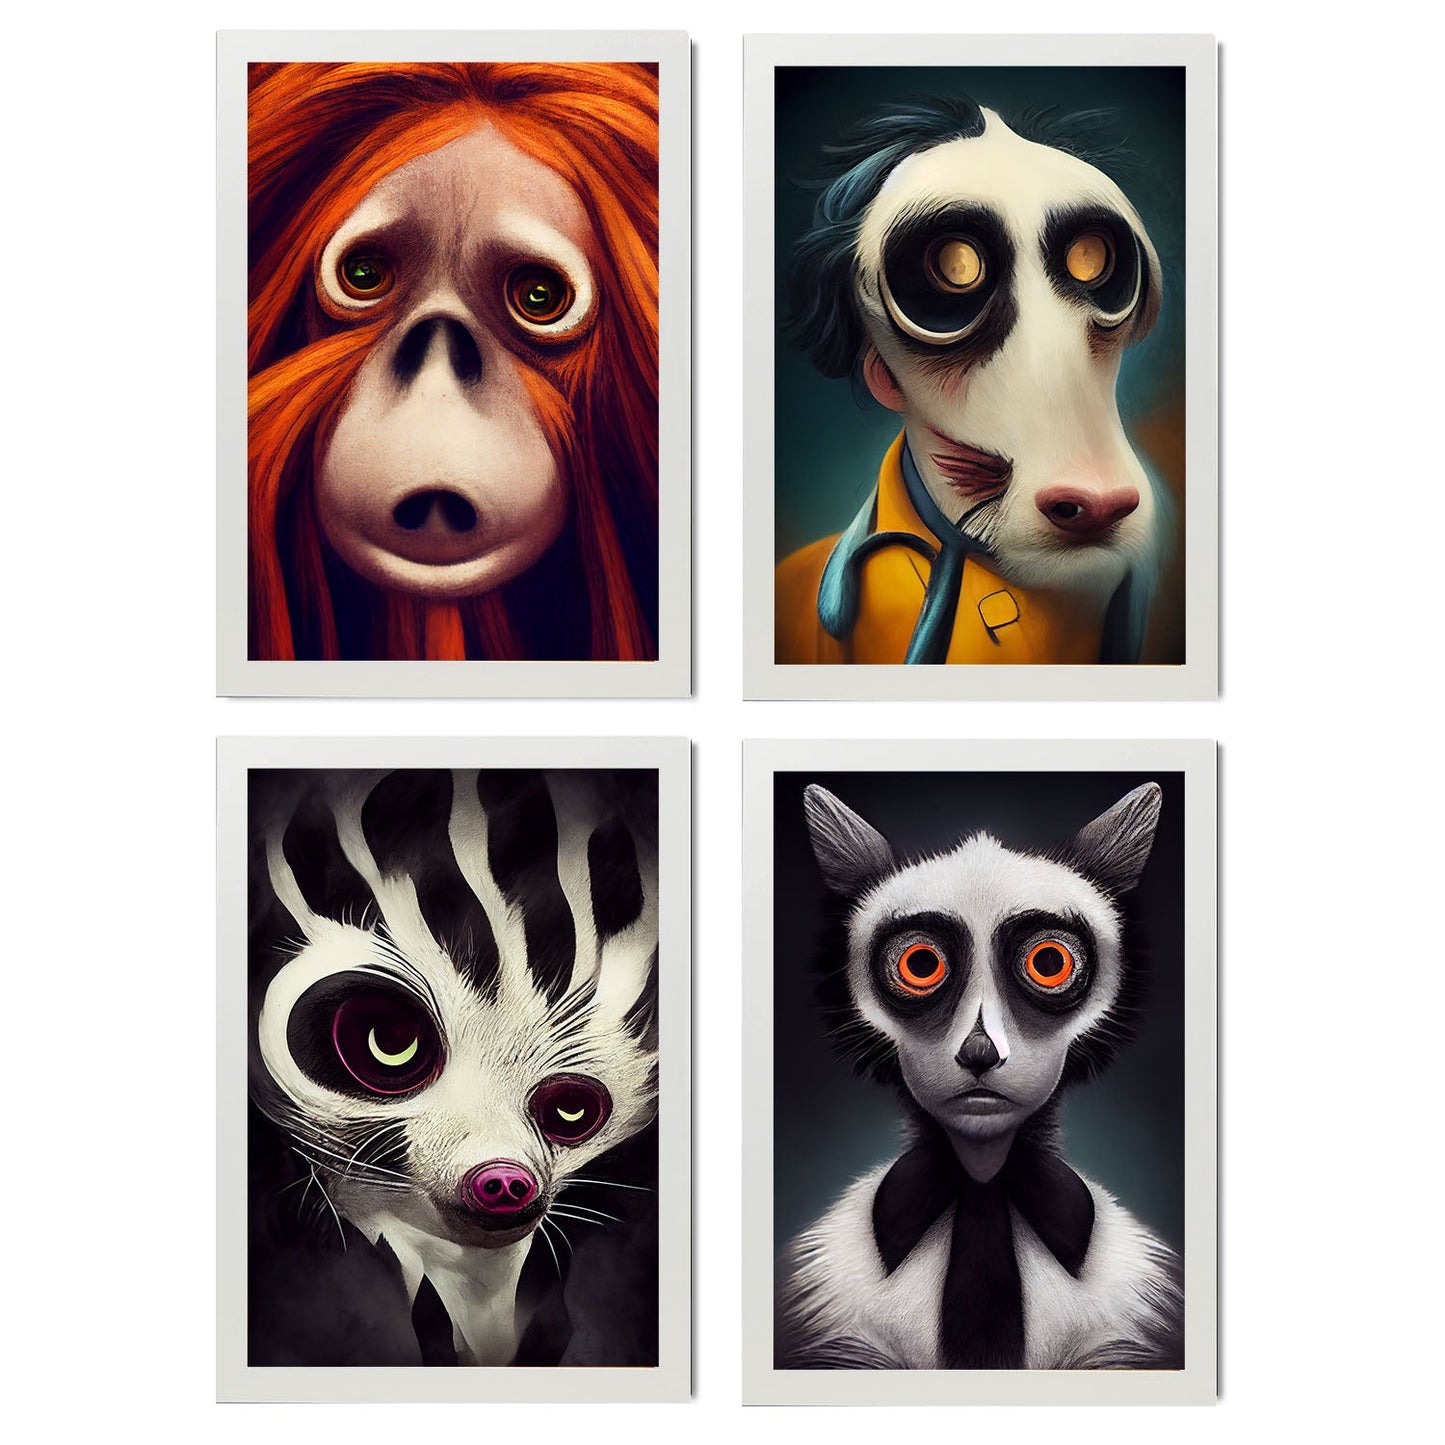 Burton style Animal Illustrations and Posters inspired by Burton's Dark and Goth art Interior Design and Decoration Set Collection 4-Artwork-Nacnic-A4-Marco Blanco-Nacnic Estudio SL